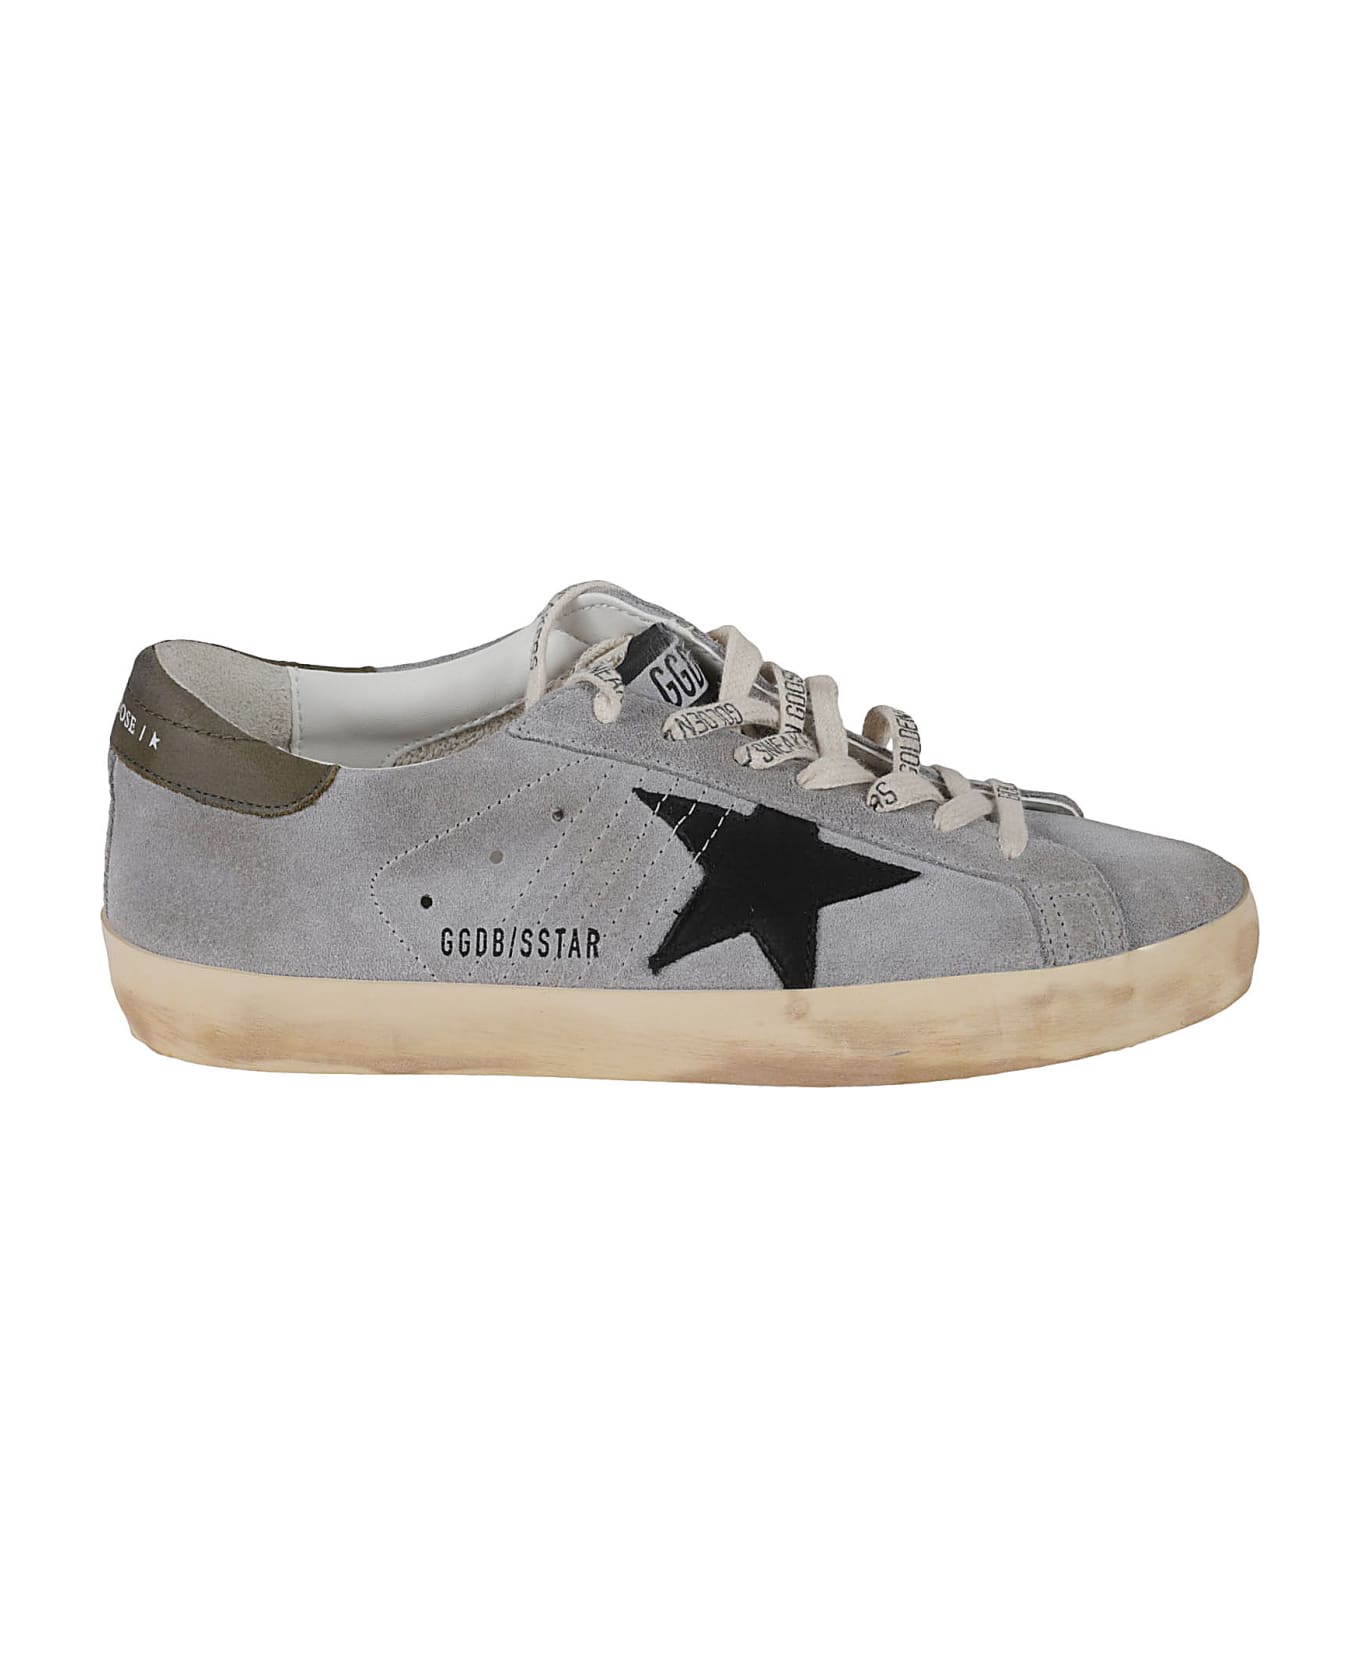 Golden Goose Super-star Classic Sneakers - Grey/Black/Forest Green